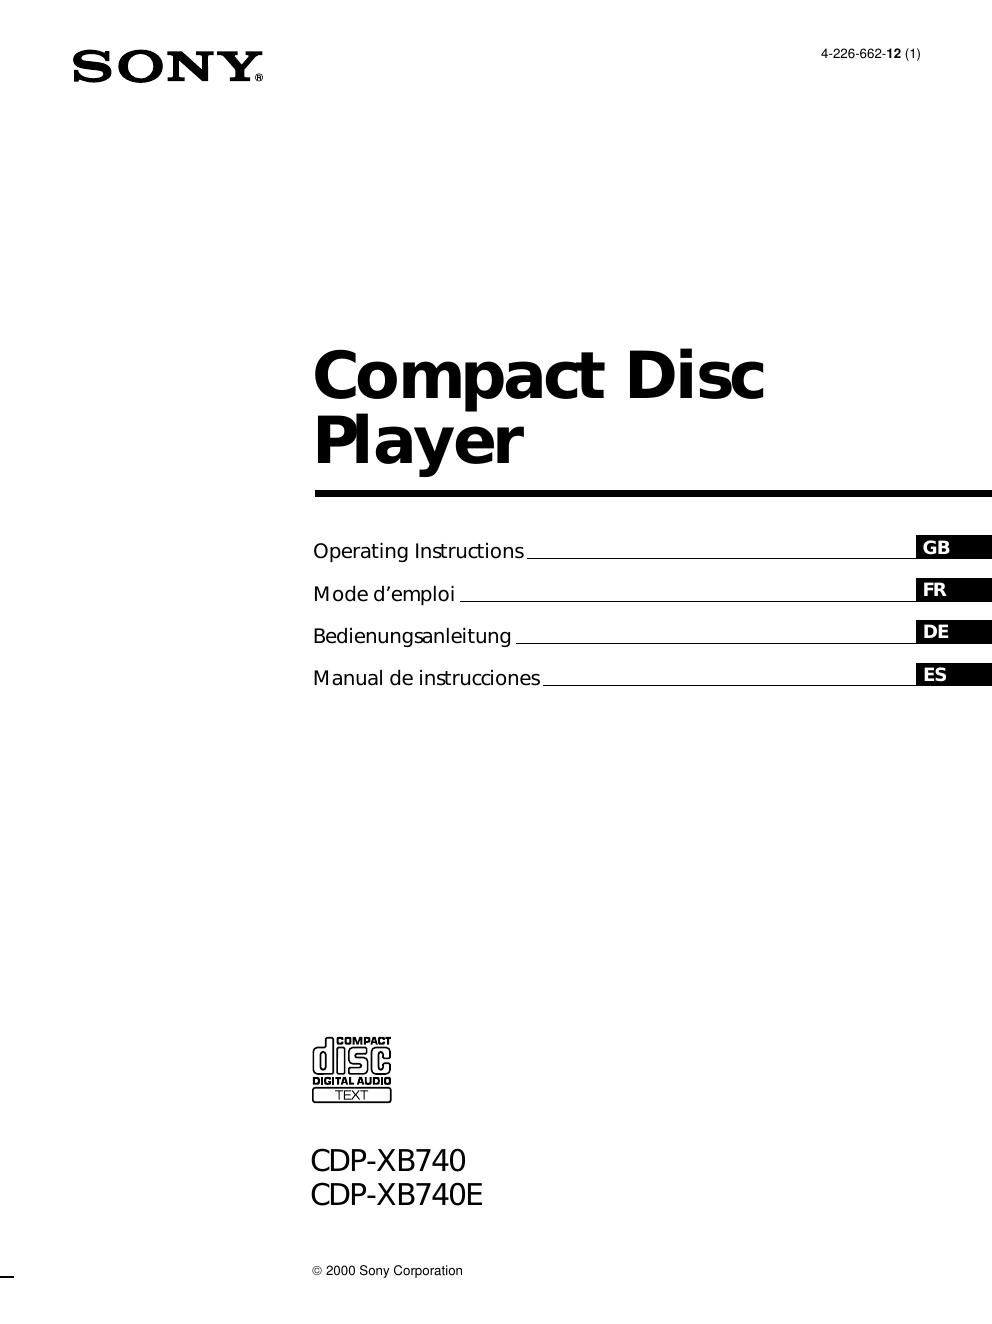 sony cdp xb 740 e owners manual